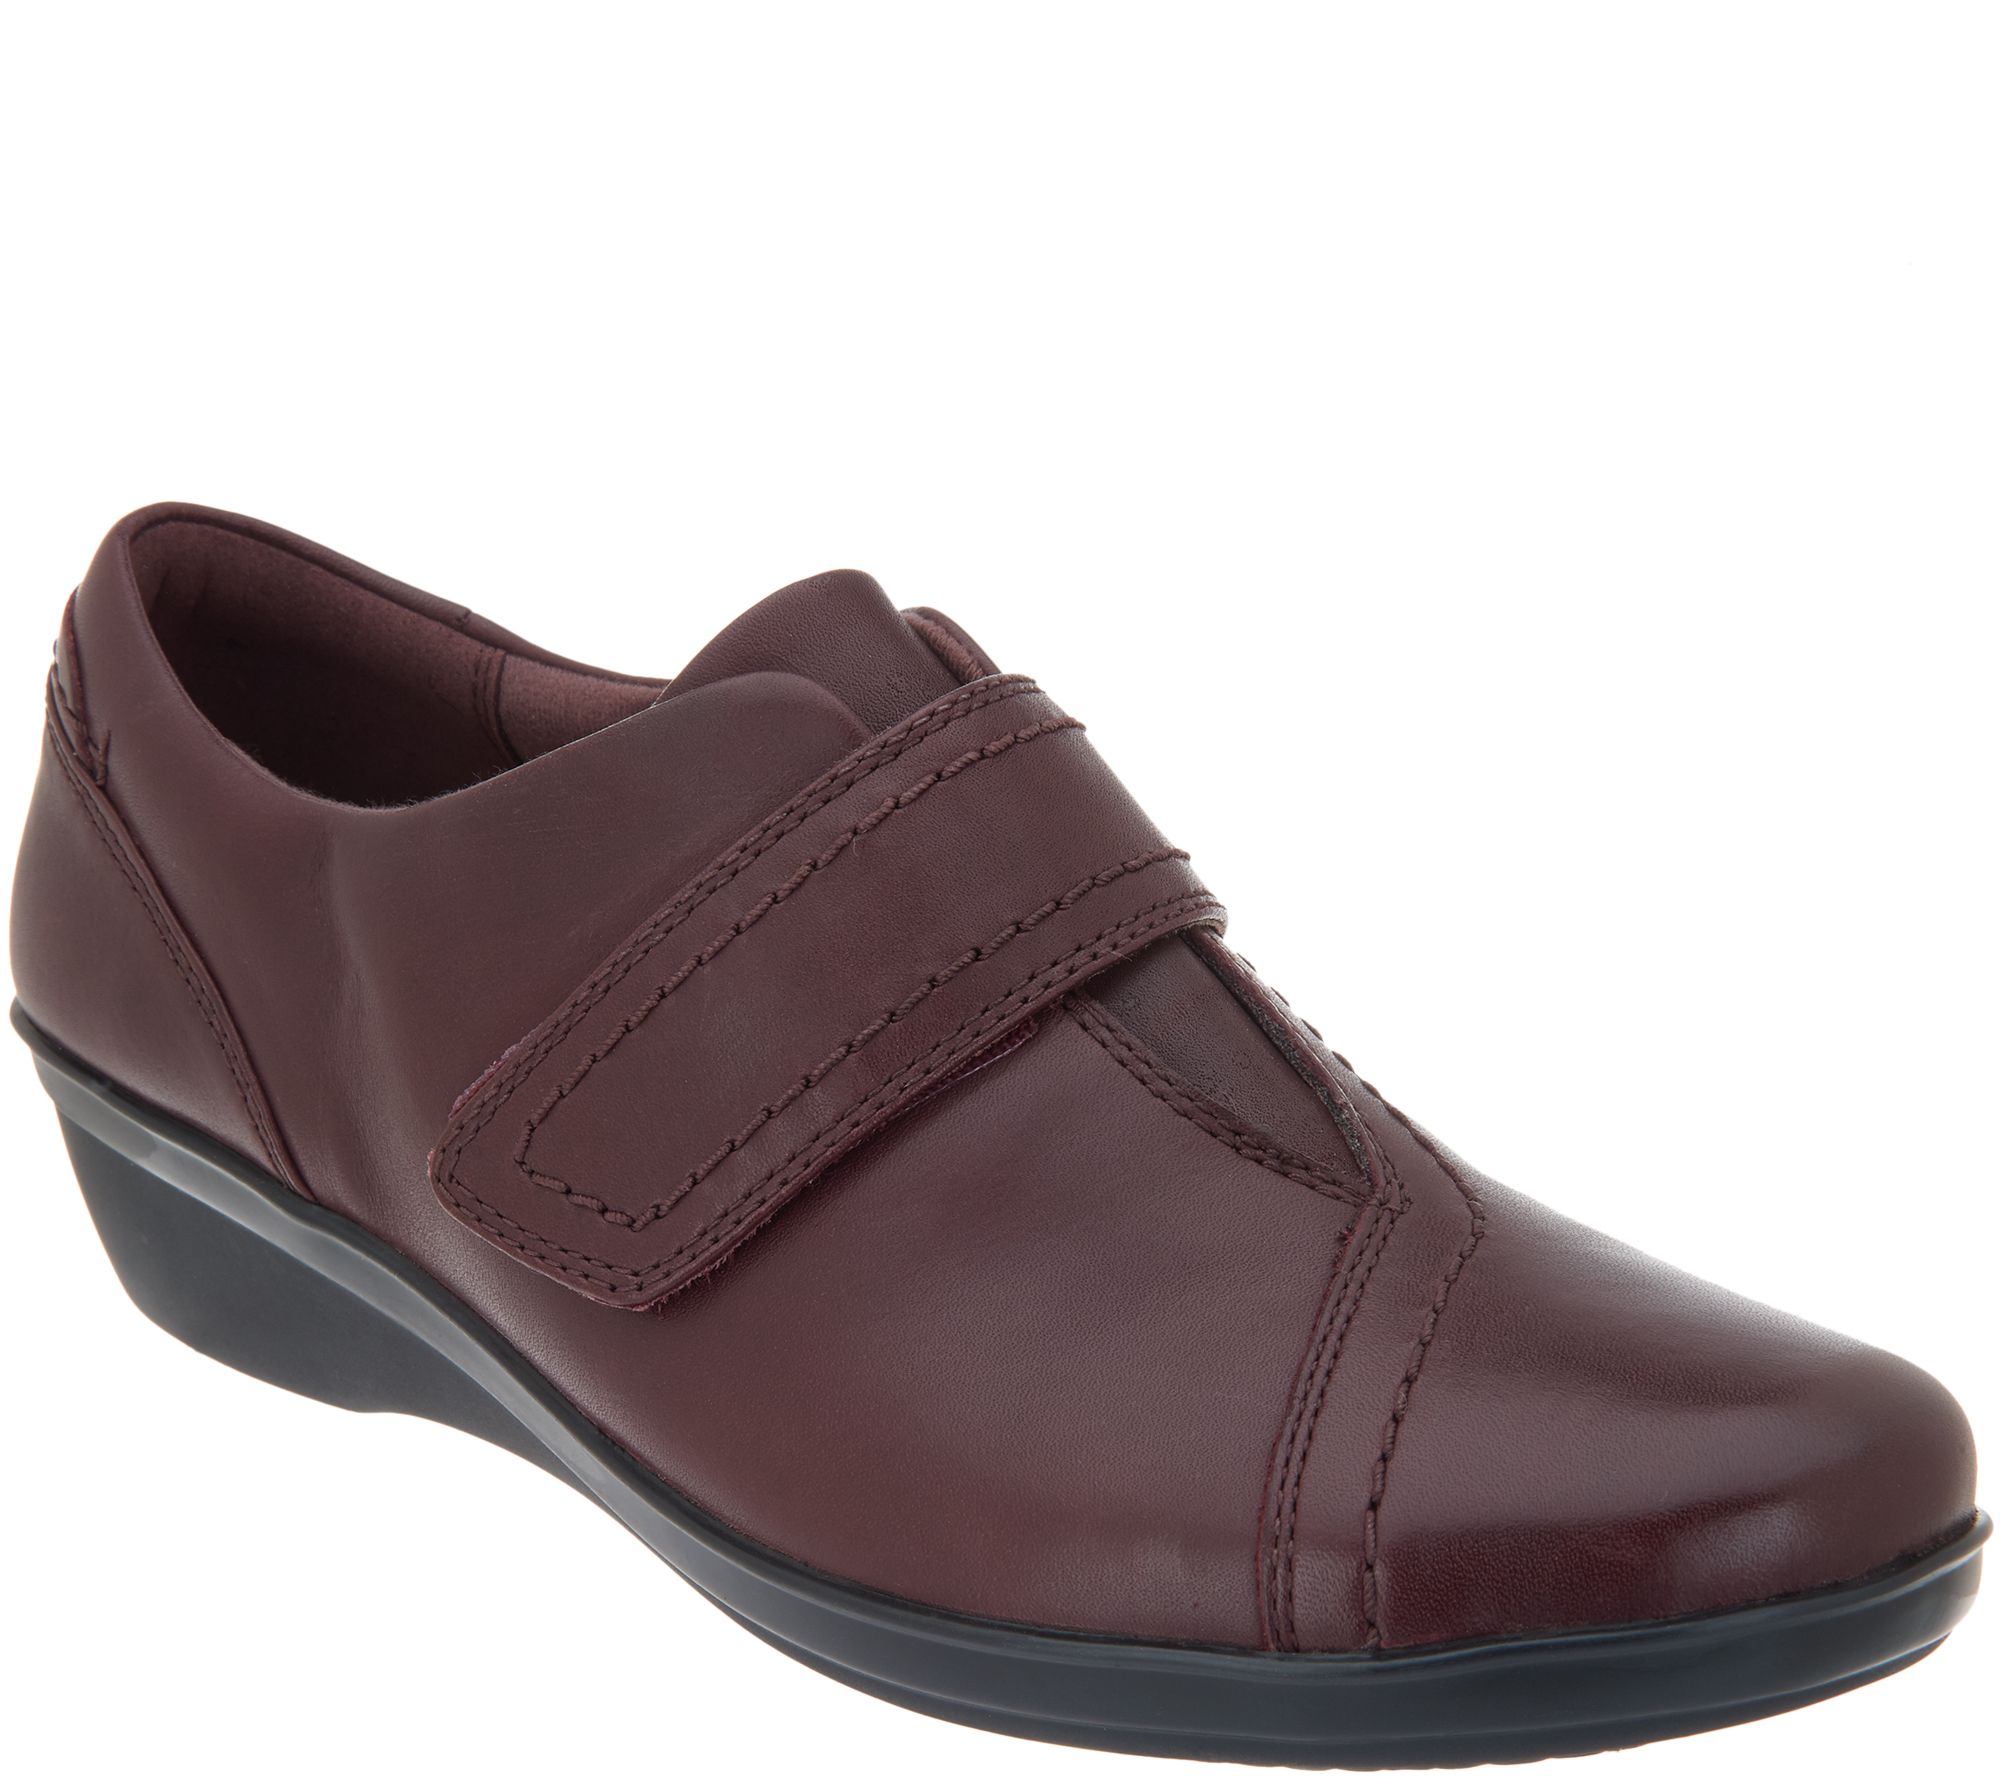 clarks in motion shoes qvc